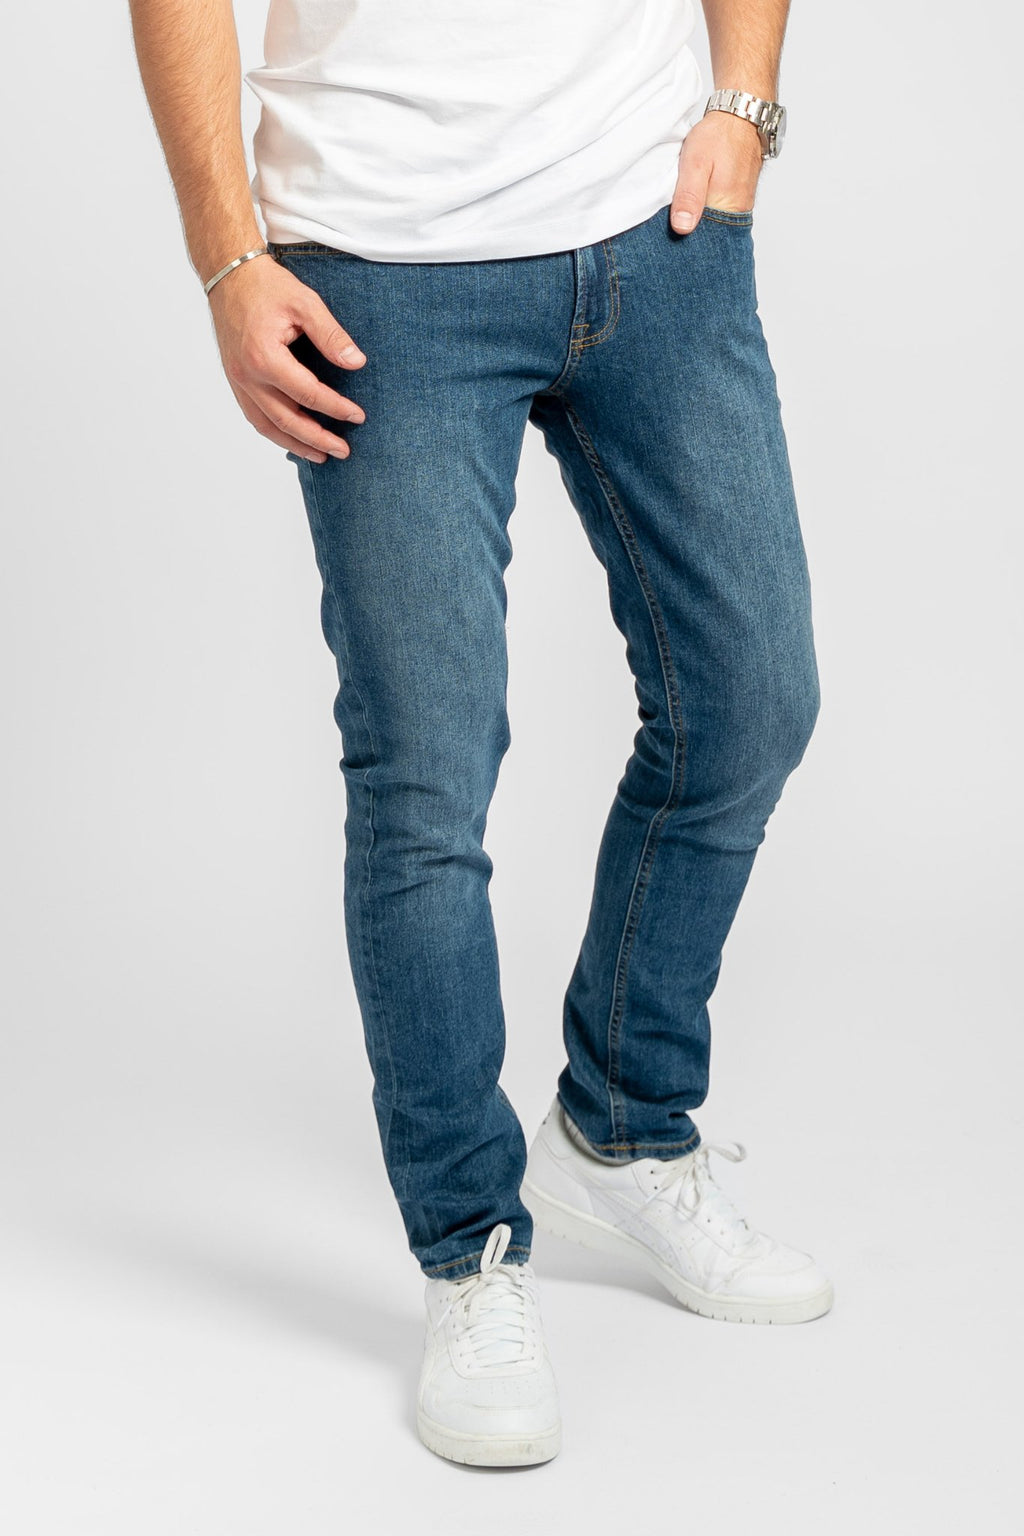 The Original Performance Jeans™️ (Slim) - Package Deal (3 pcs.) (email)